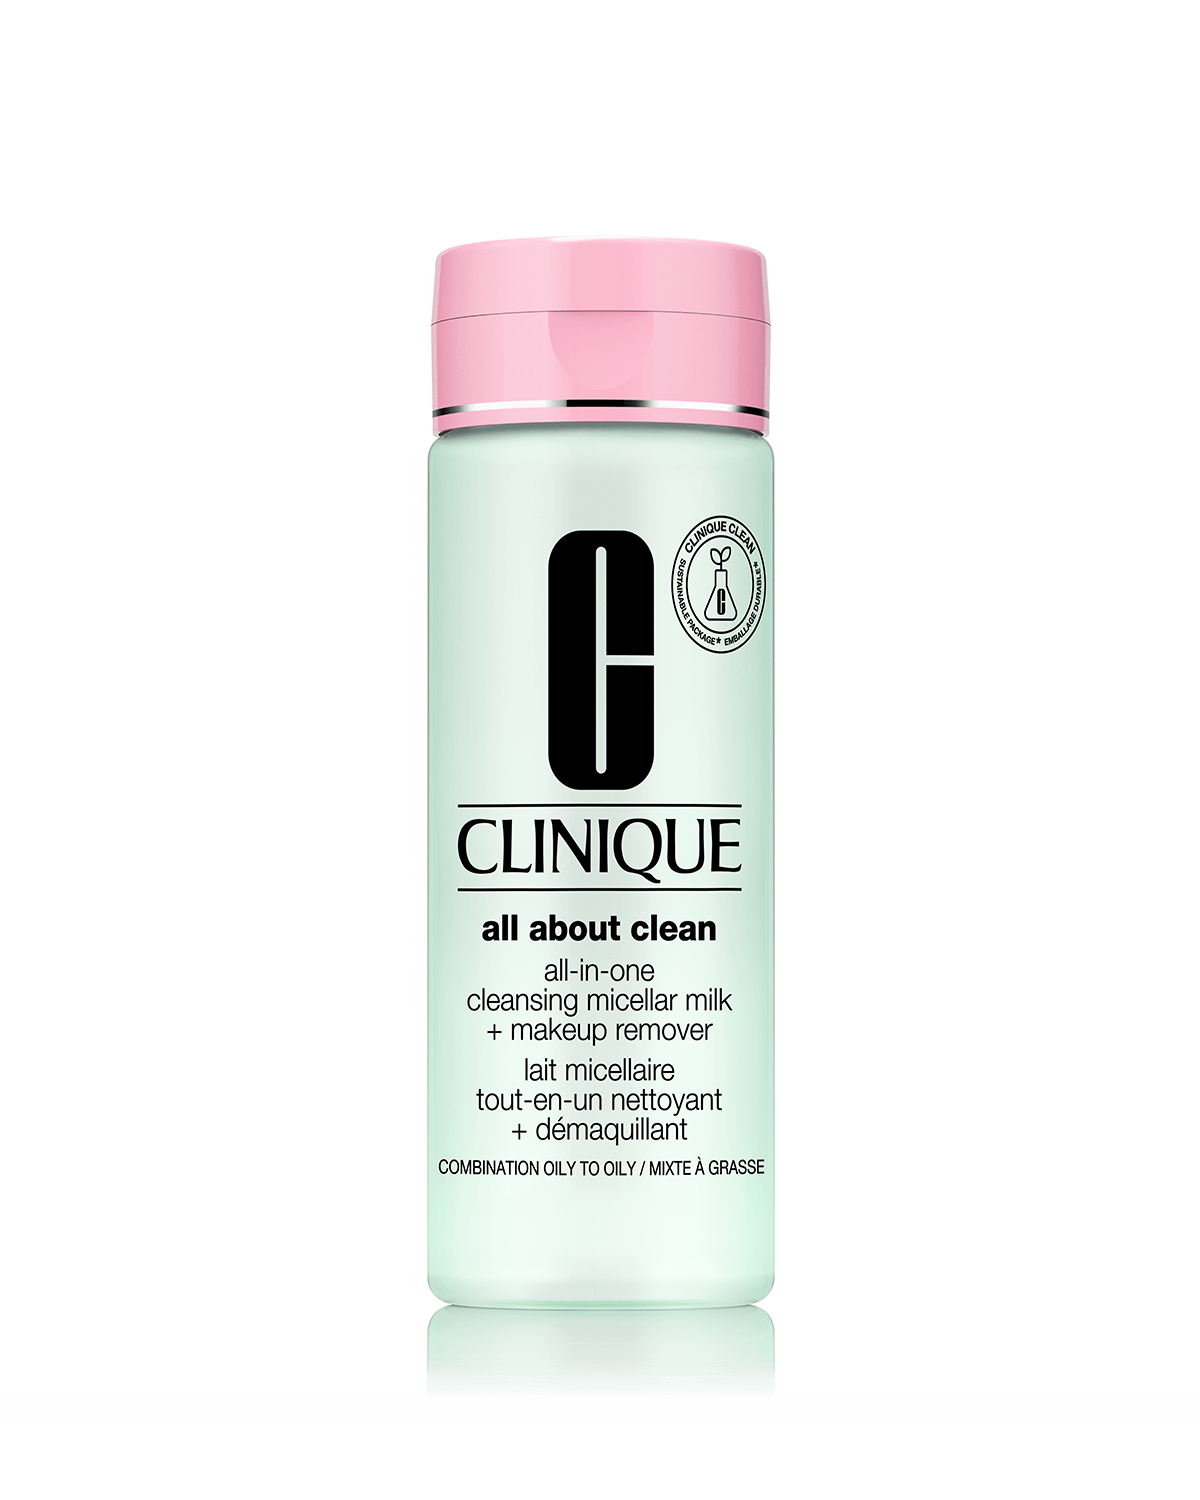 All About Clean All-in-One Micellar Milk + Makeup Remover